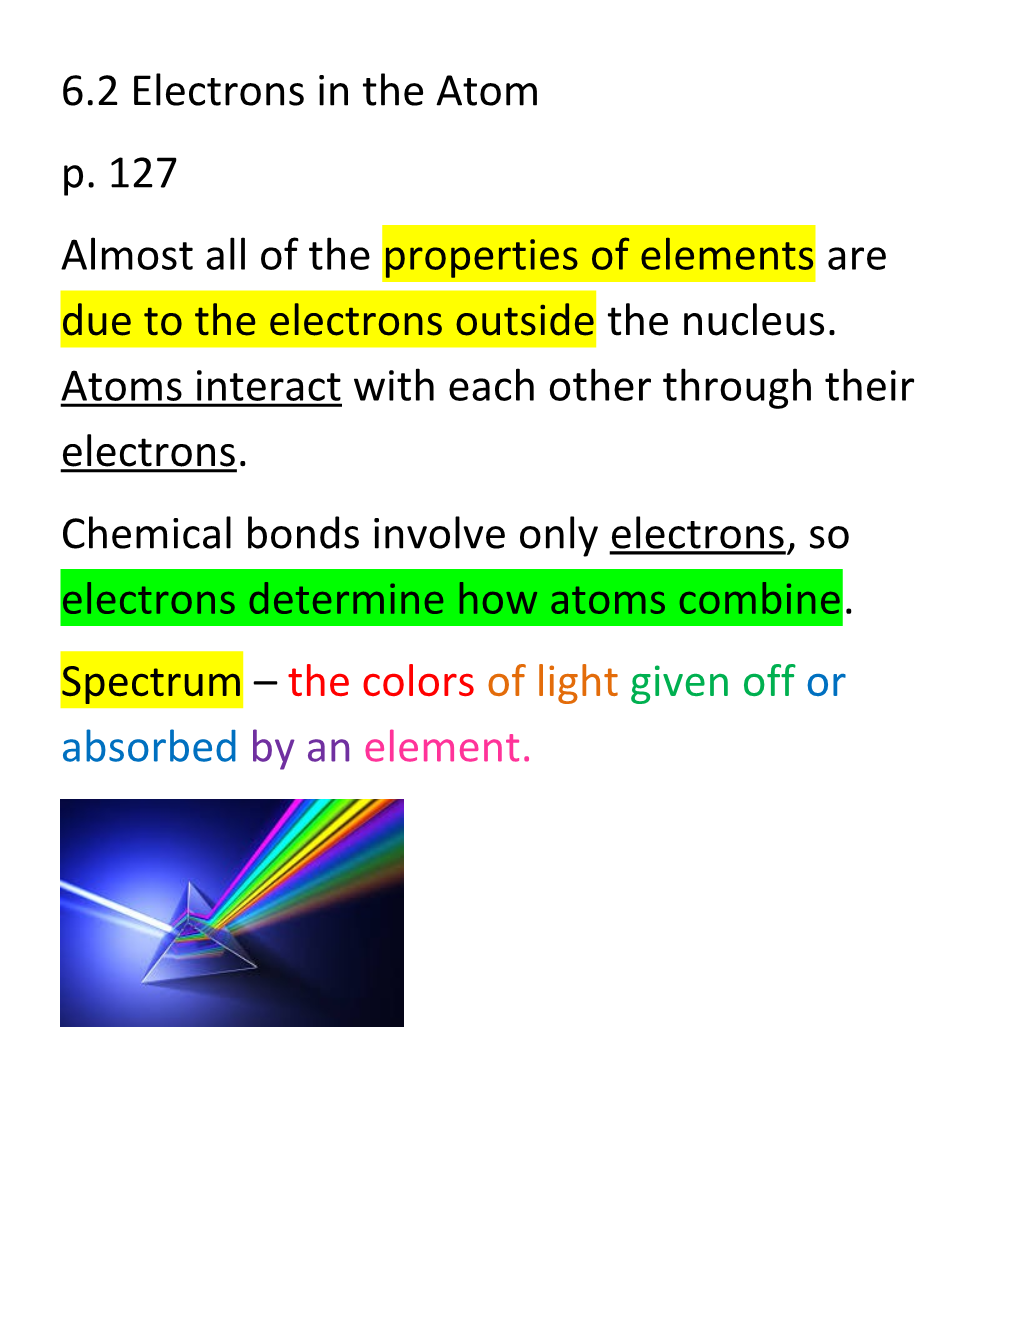 Chemical Bonds Involve Only Electrons, So Electrons Determine How Atoms Combine